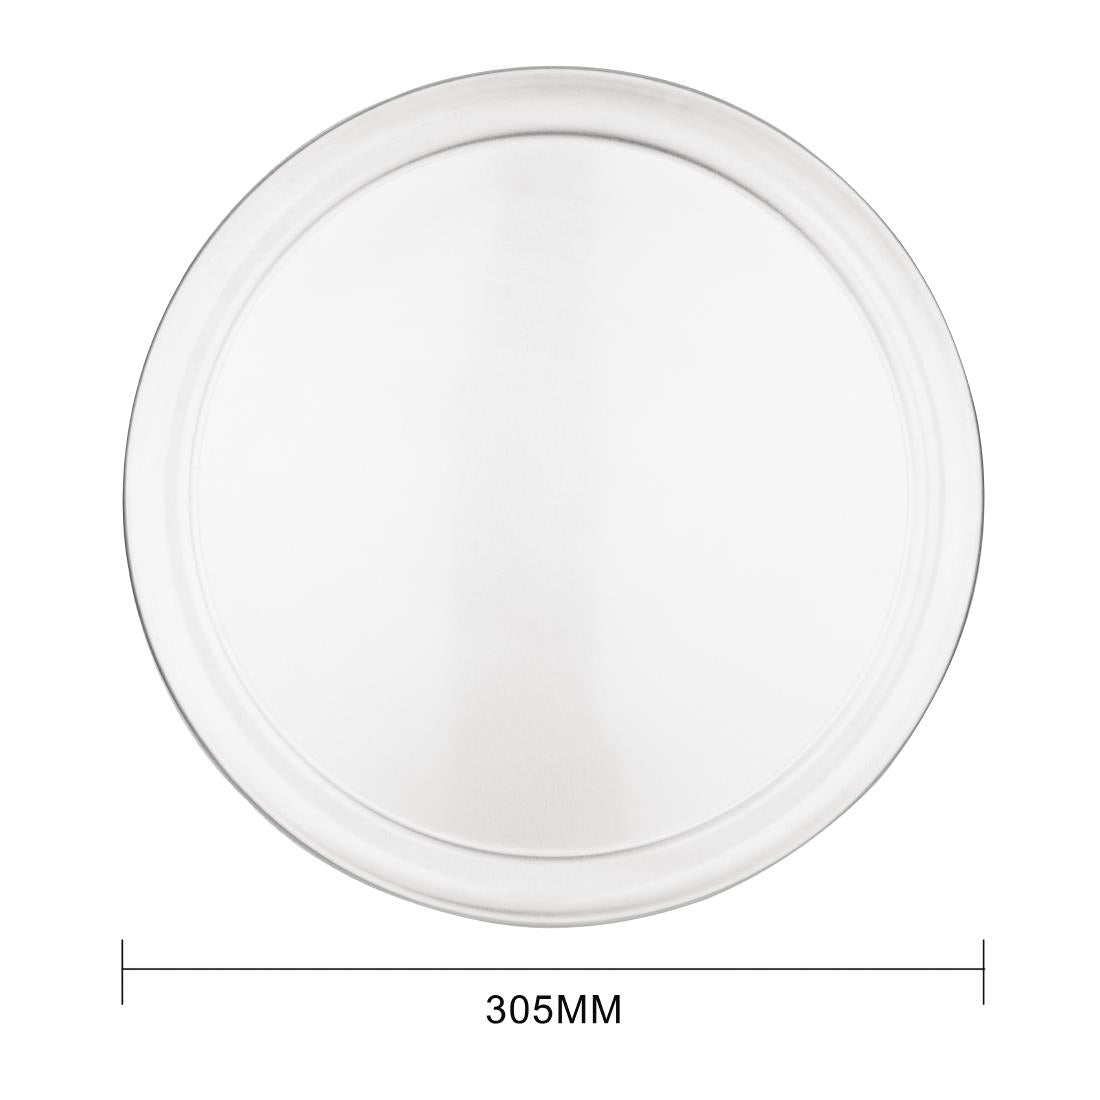 (Available TBC) F008 Vogue Aluminium Pizza Tray 12in JD Catering Equipment Solutions Ltd